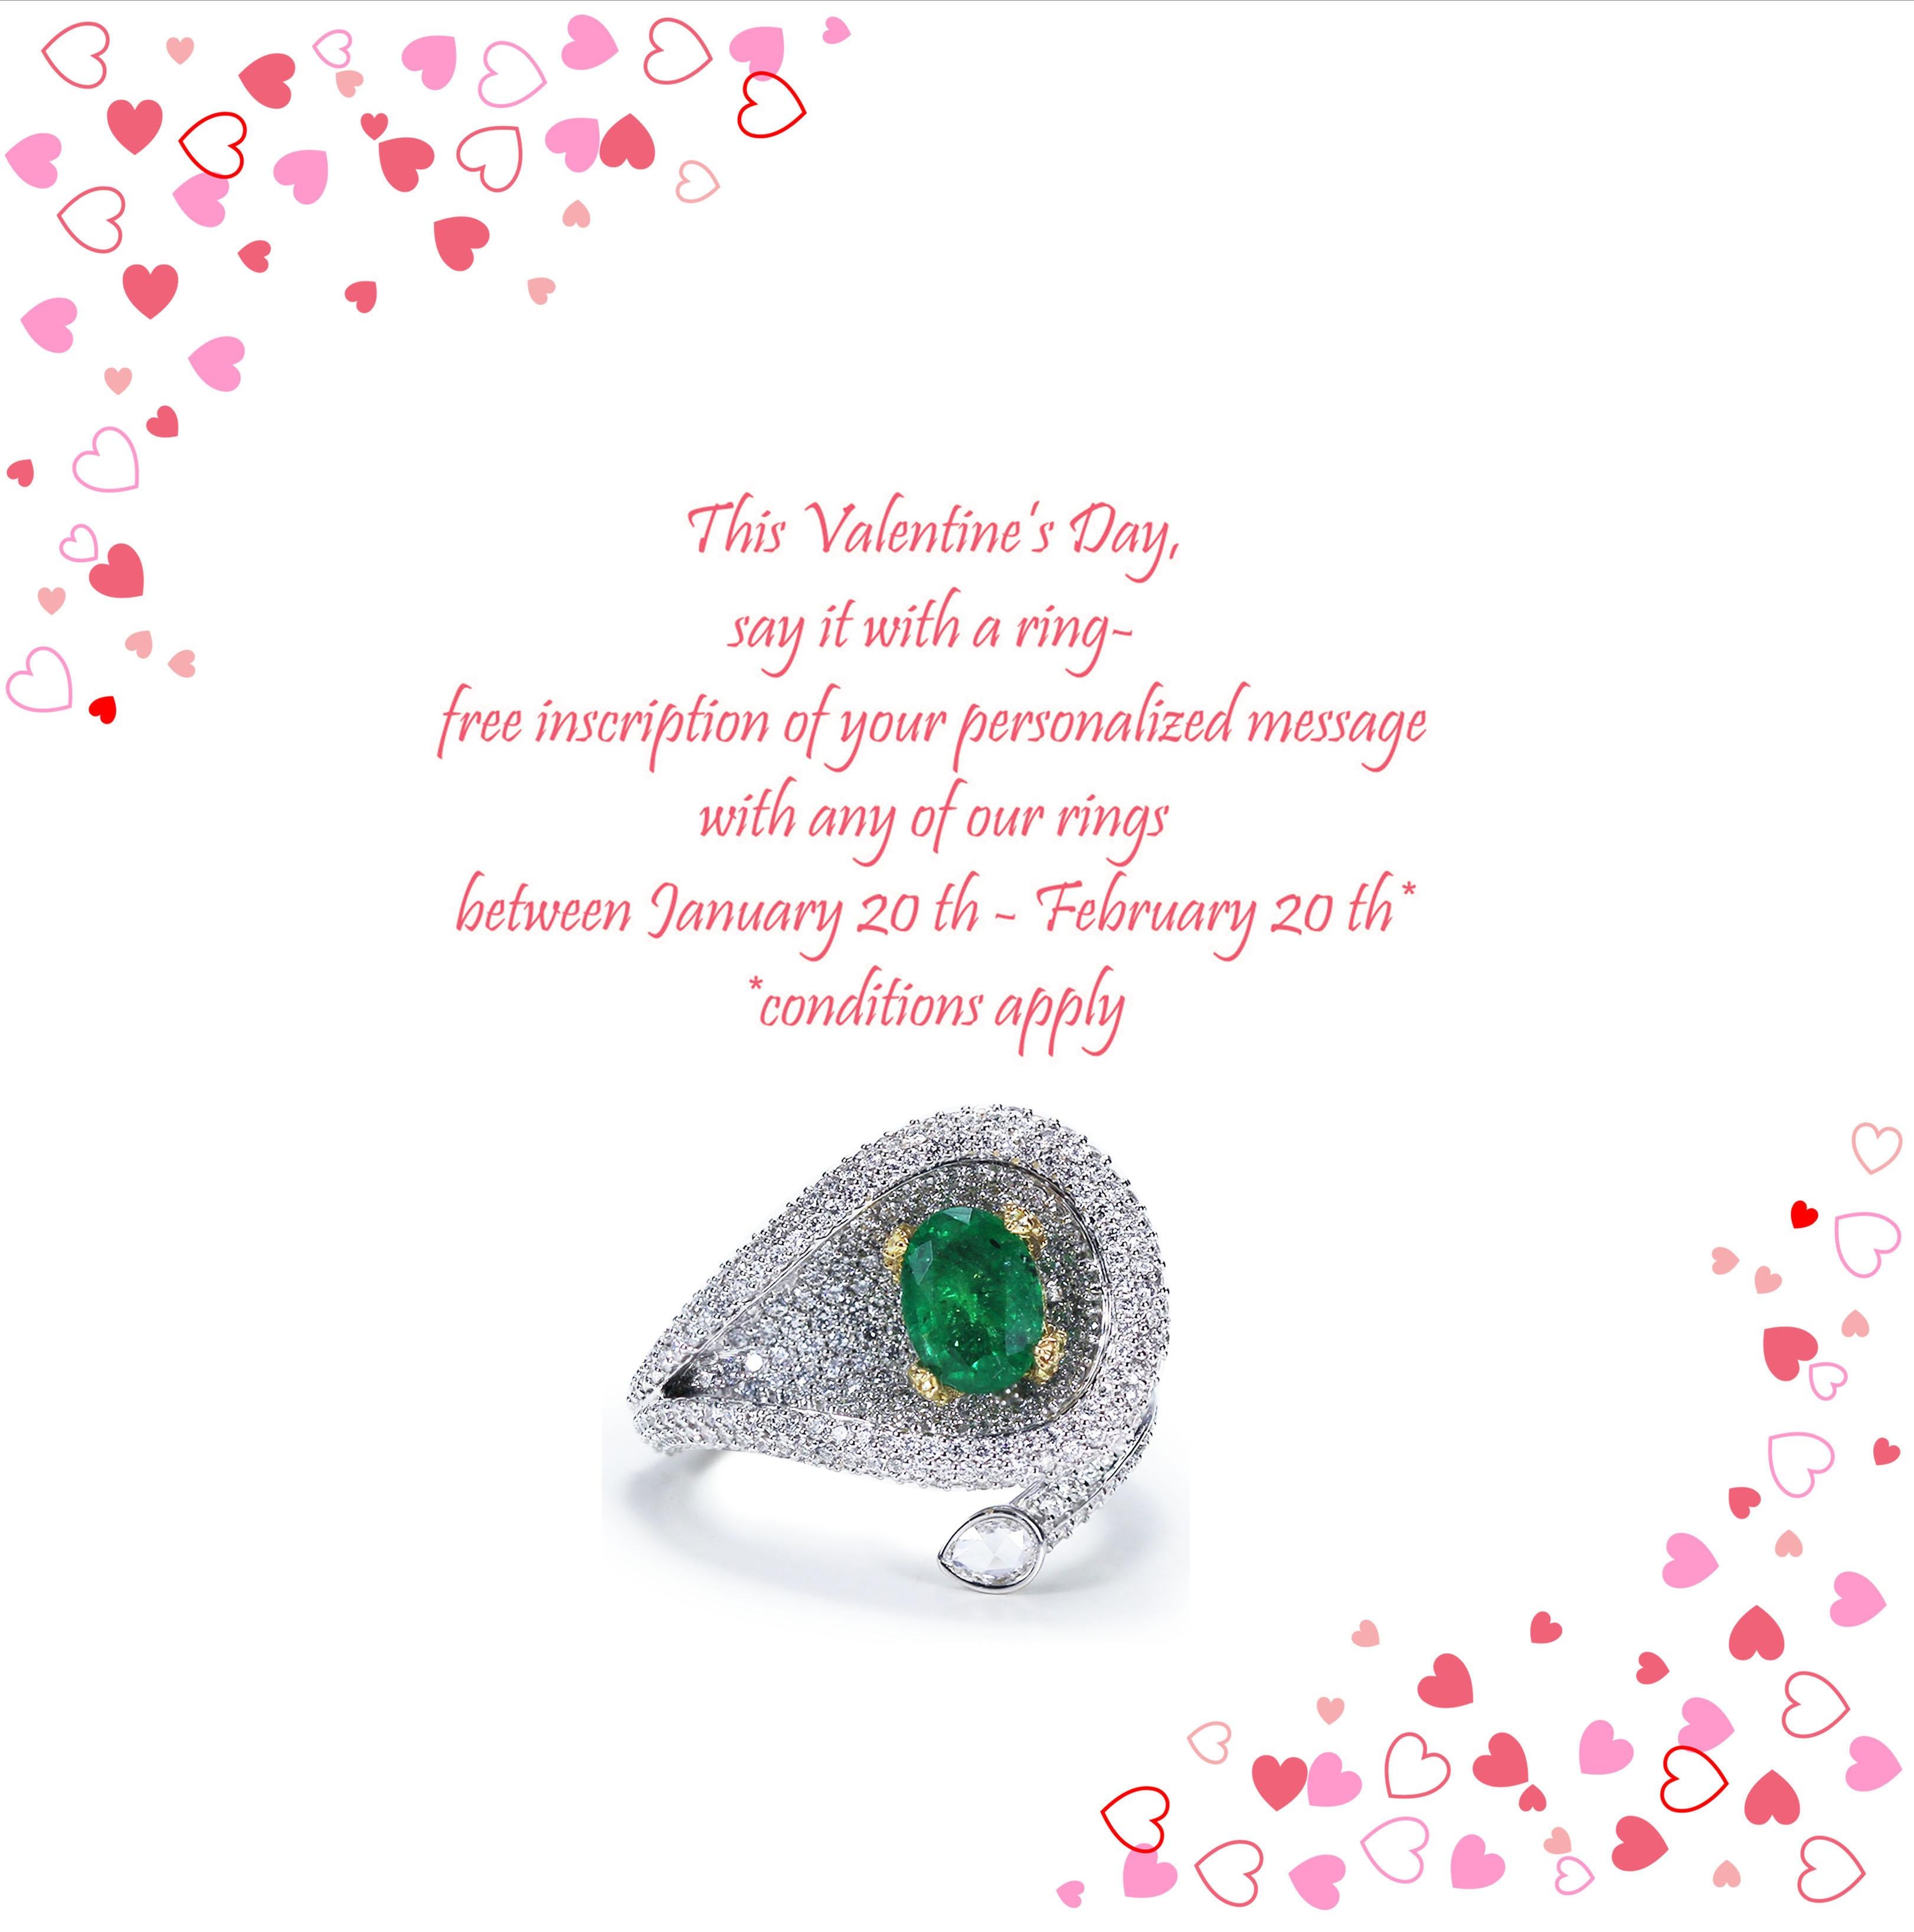 
This Valentine’s Day, say it with a ring- free inscription of your personalized message with any of our rings between January 20 th - February 20 th* 

F-G/ VS-SI brilliant cut diamonds and emerald ring 

We take the classic emerald and diamond